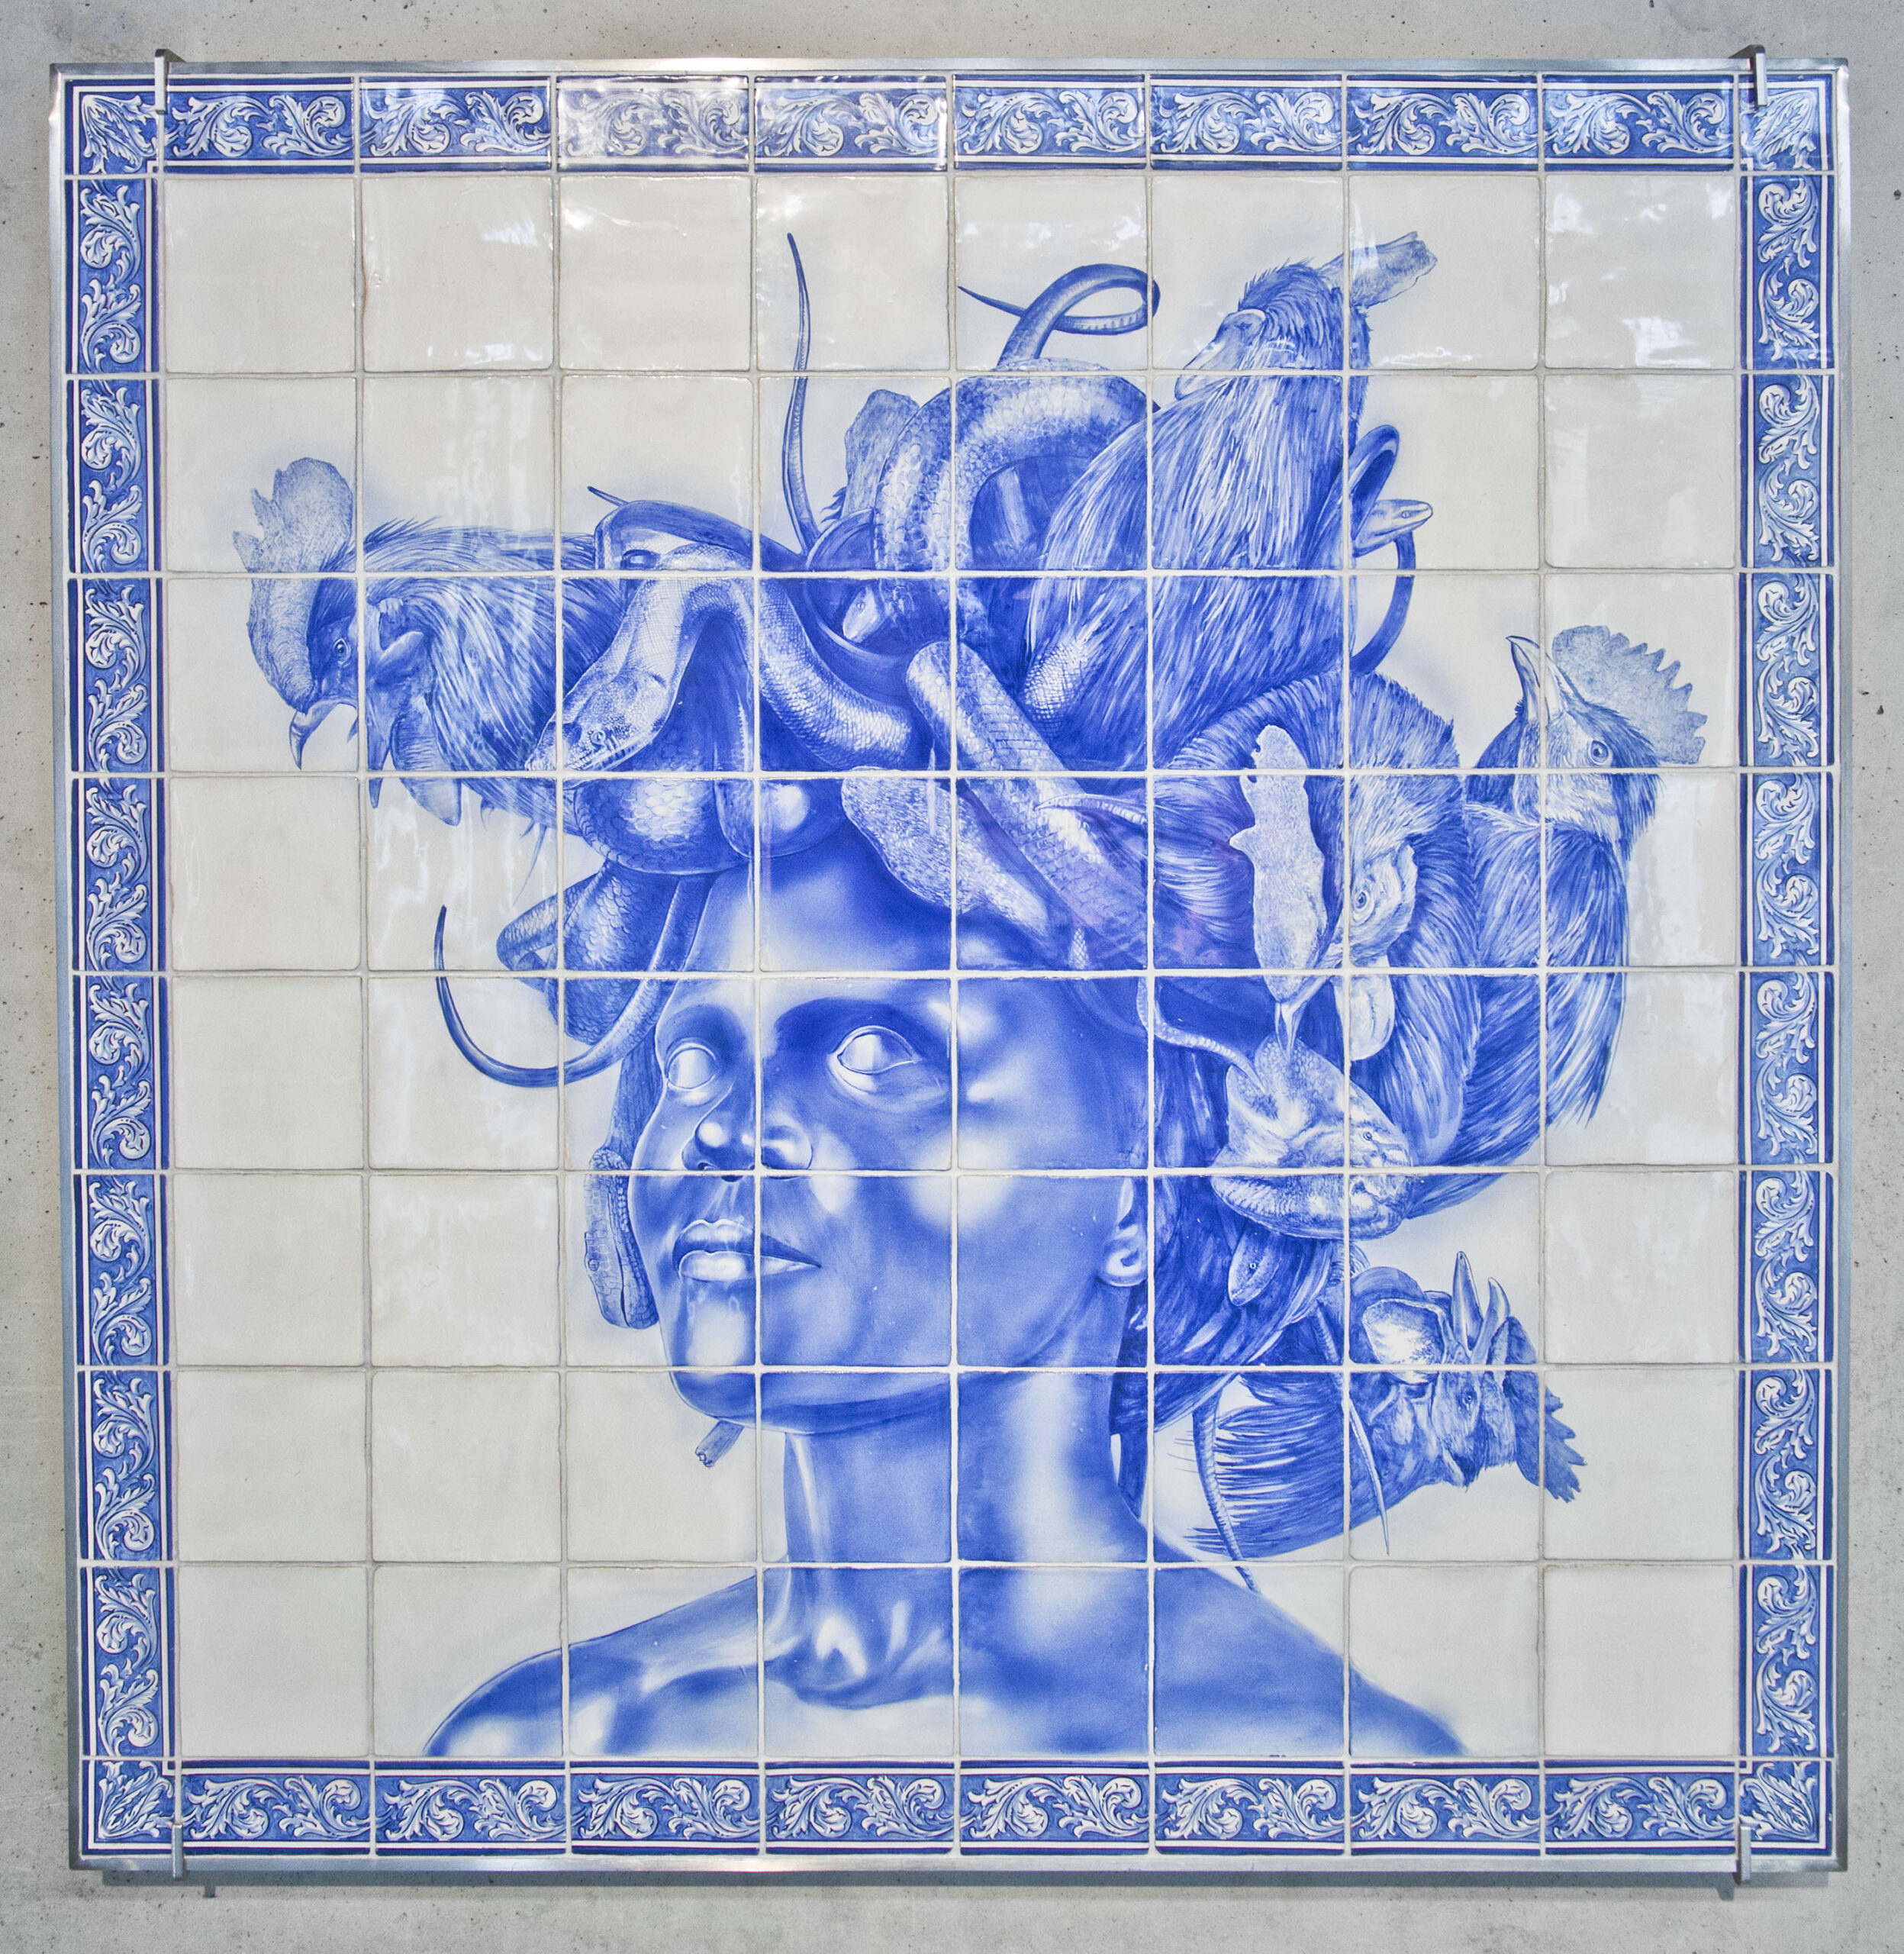 A grid of cobalt blue and white tiles display a painted image of the historic figure Medusa with both snakes and chickens as hair. Her eyes are blank without pupils and stare beyond the edge of the grid.